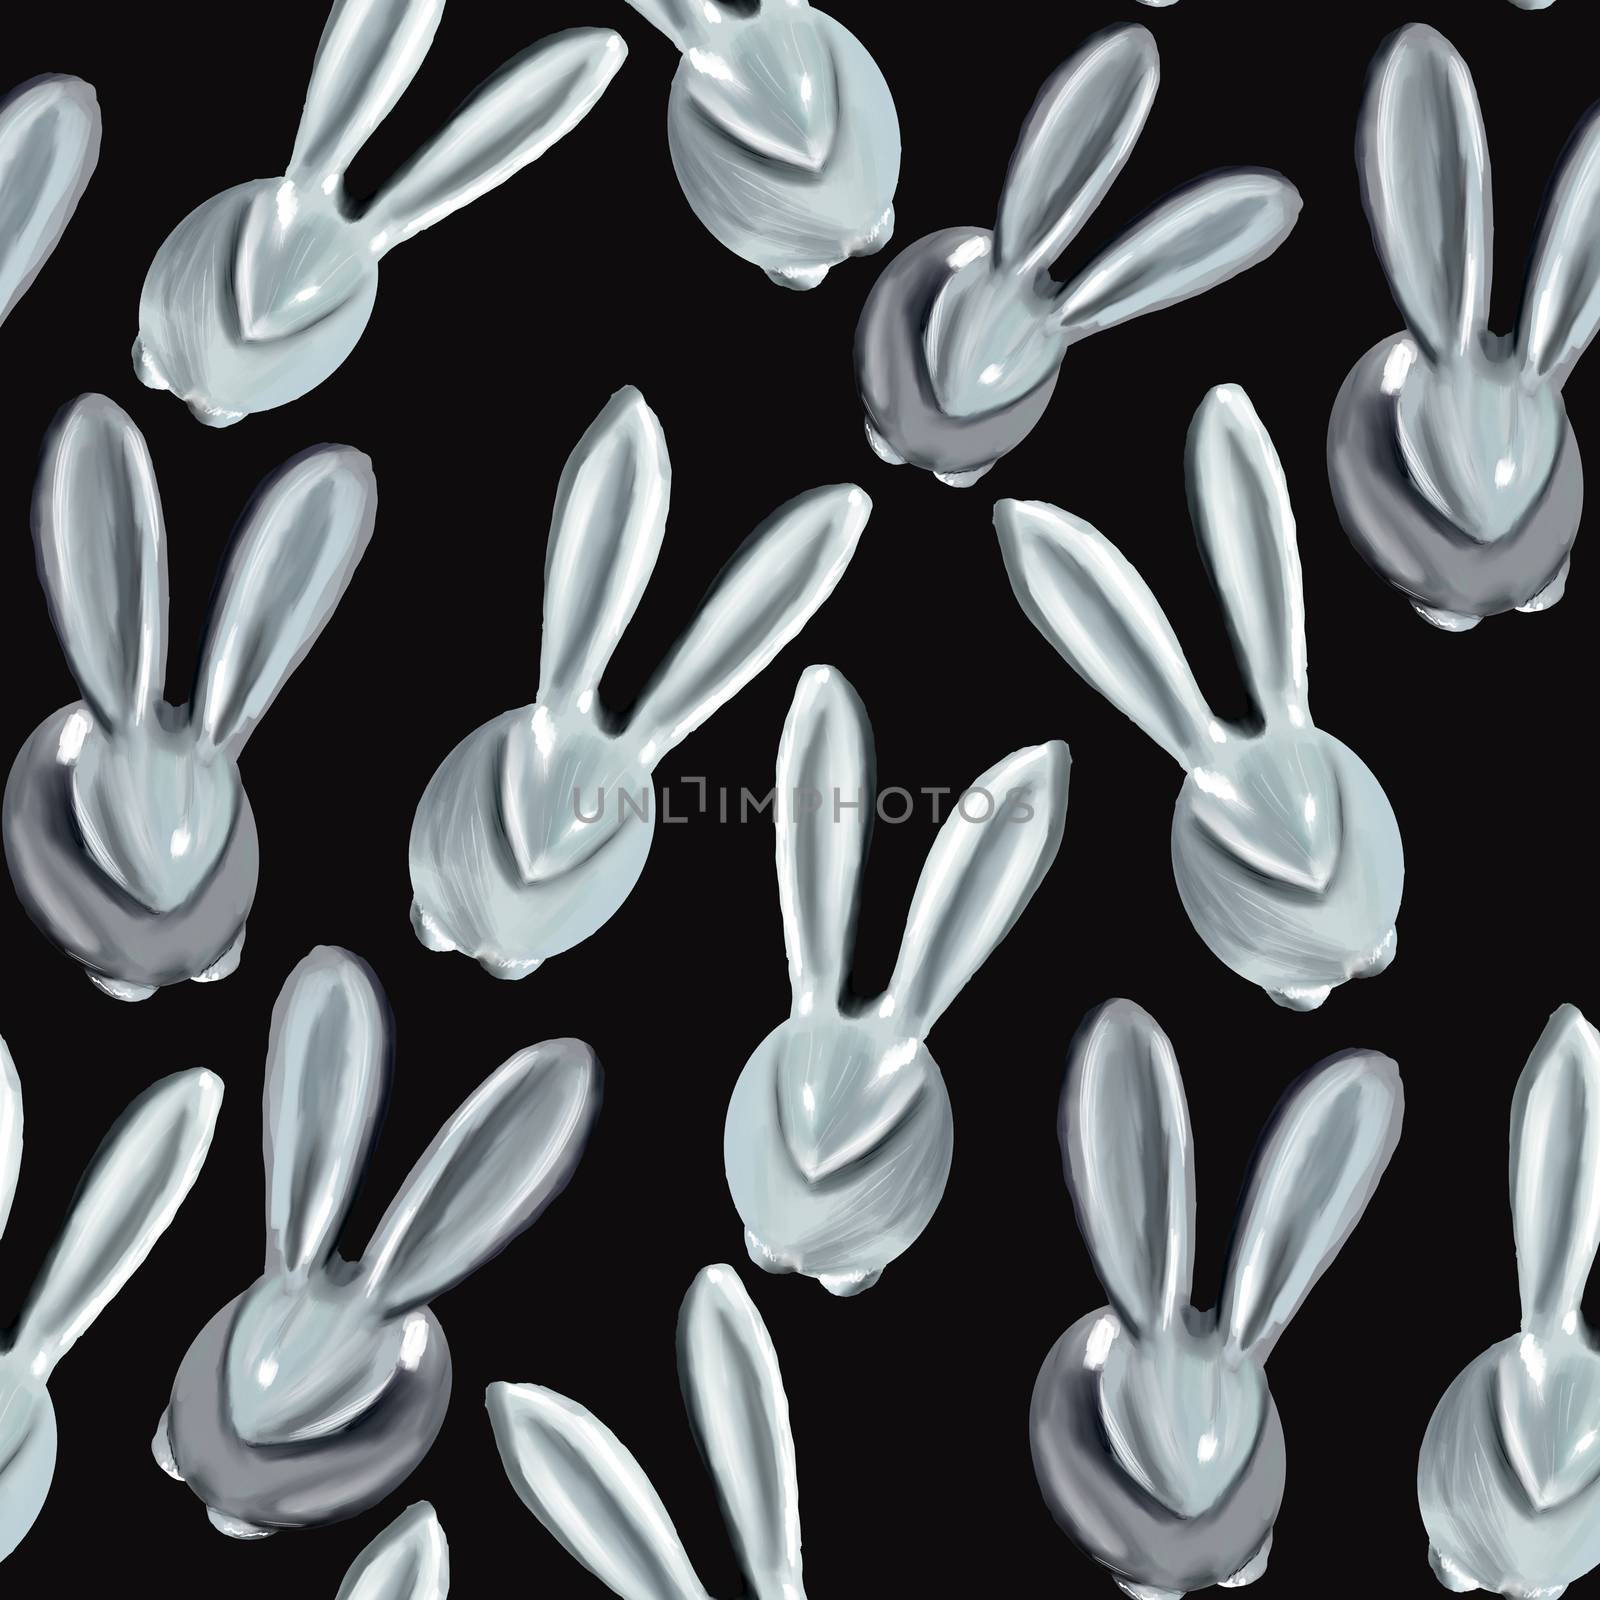 Ceramic easter bunny repeat pattern on black background. Seamless design illustration for festive postcards, banners, textile, background, wallpaper.